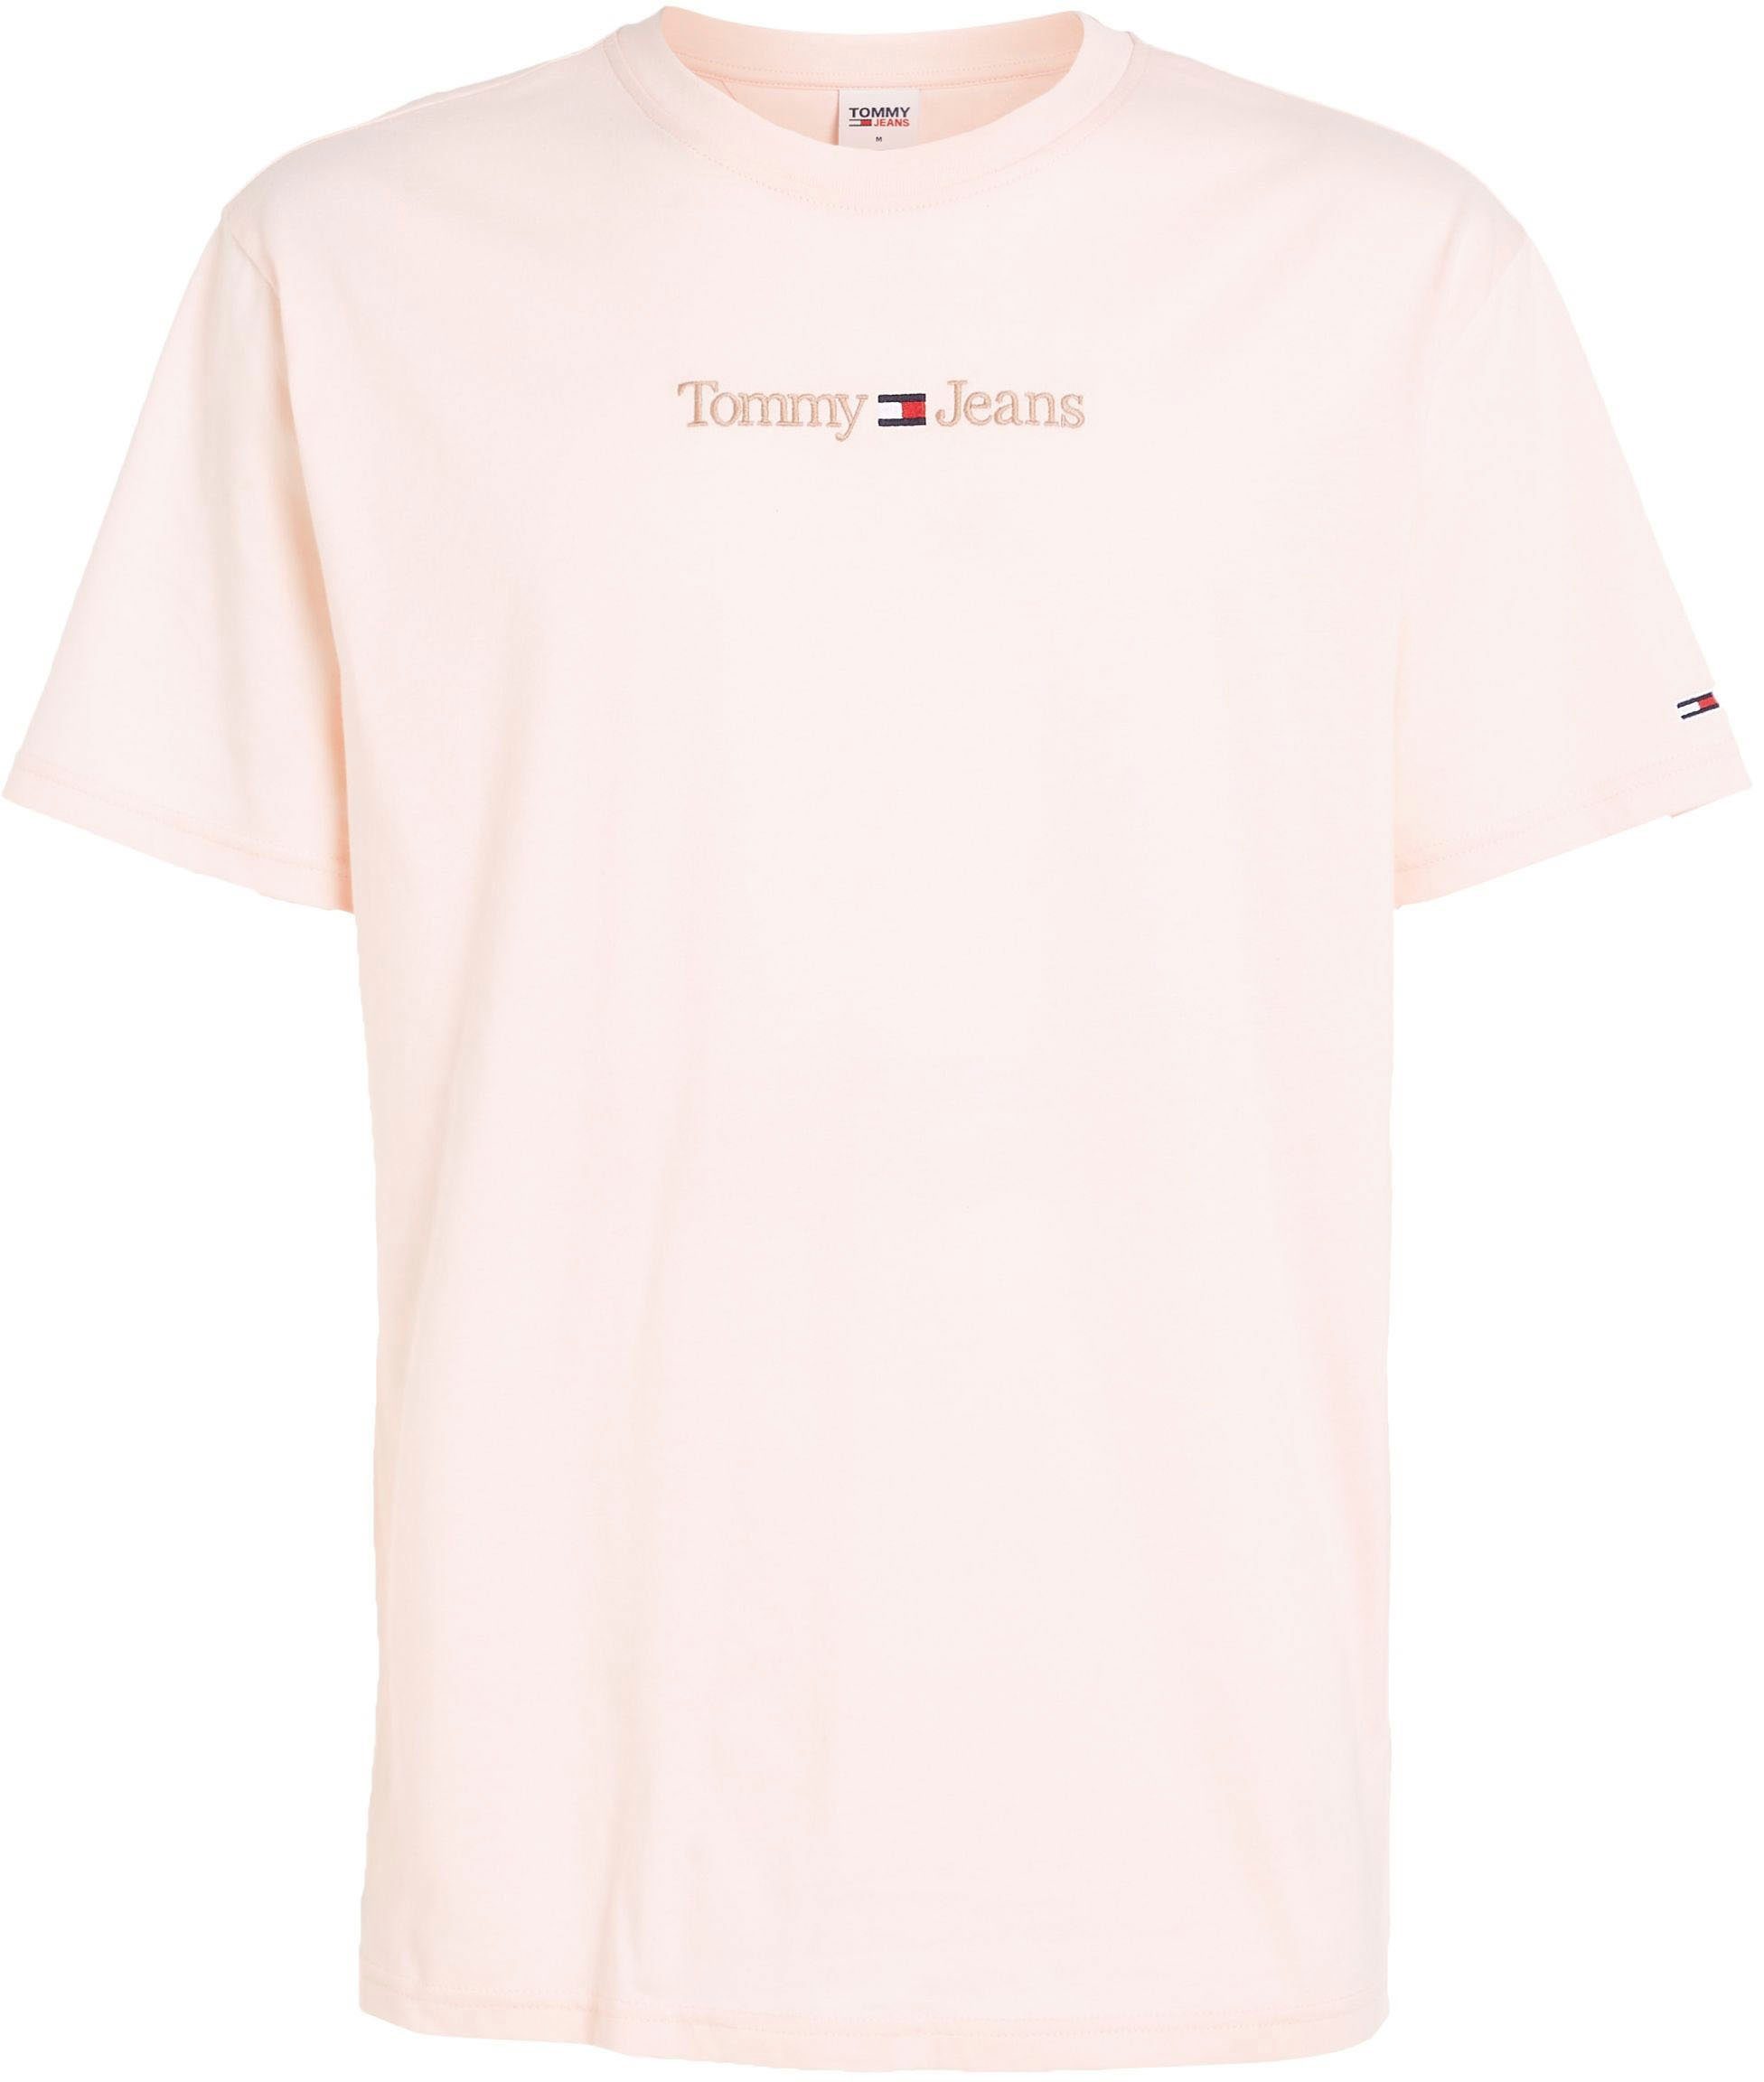 Tommy TJM TEXT CLSC TEE Pink Jeans T-Shirt Faint SMALL